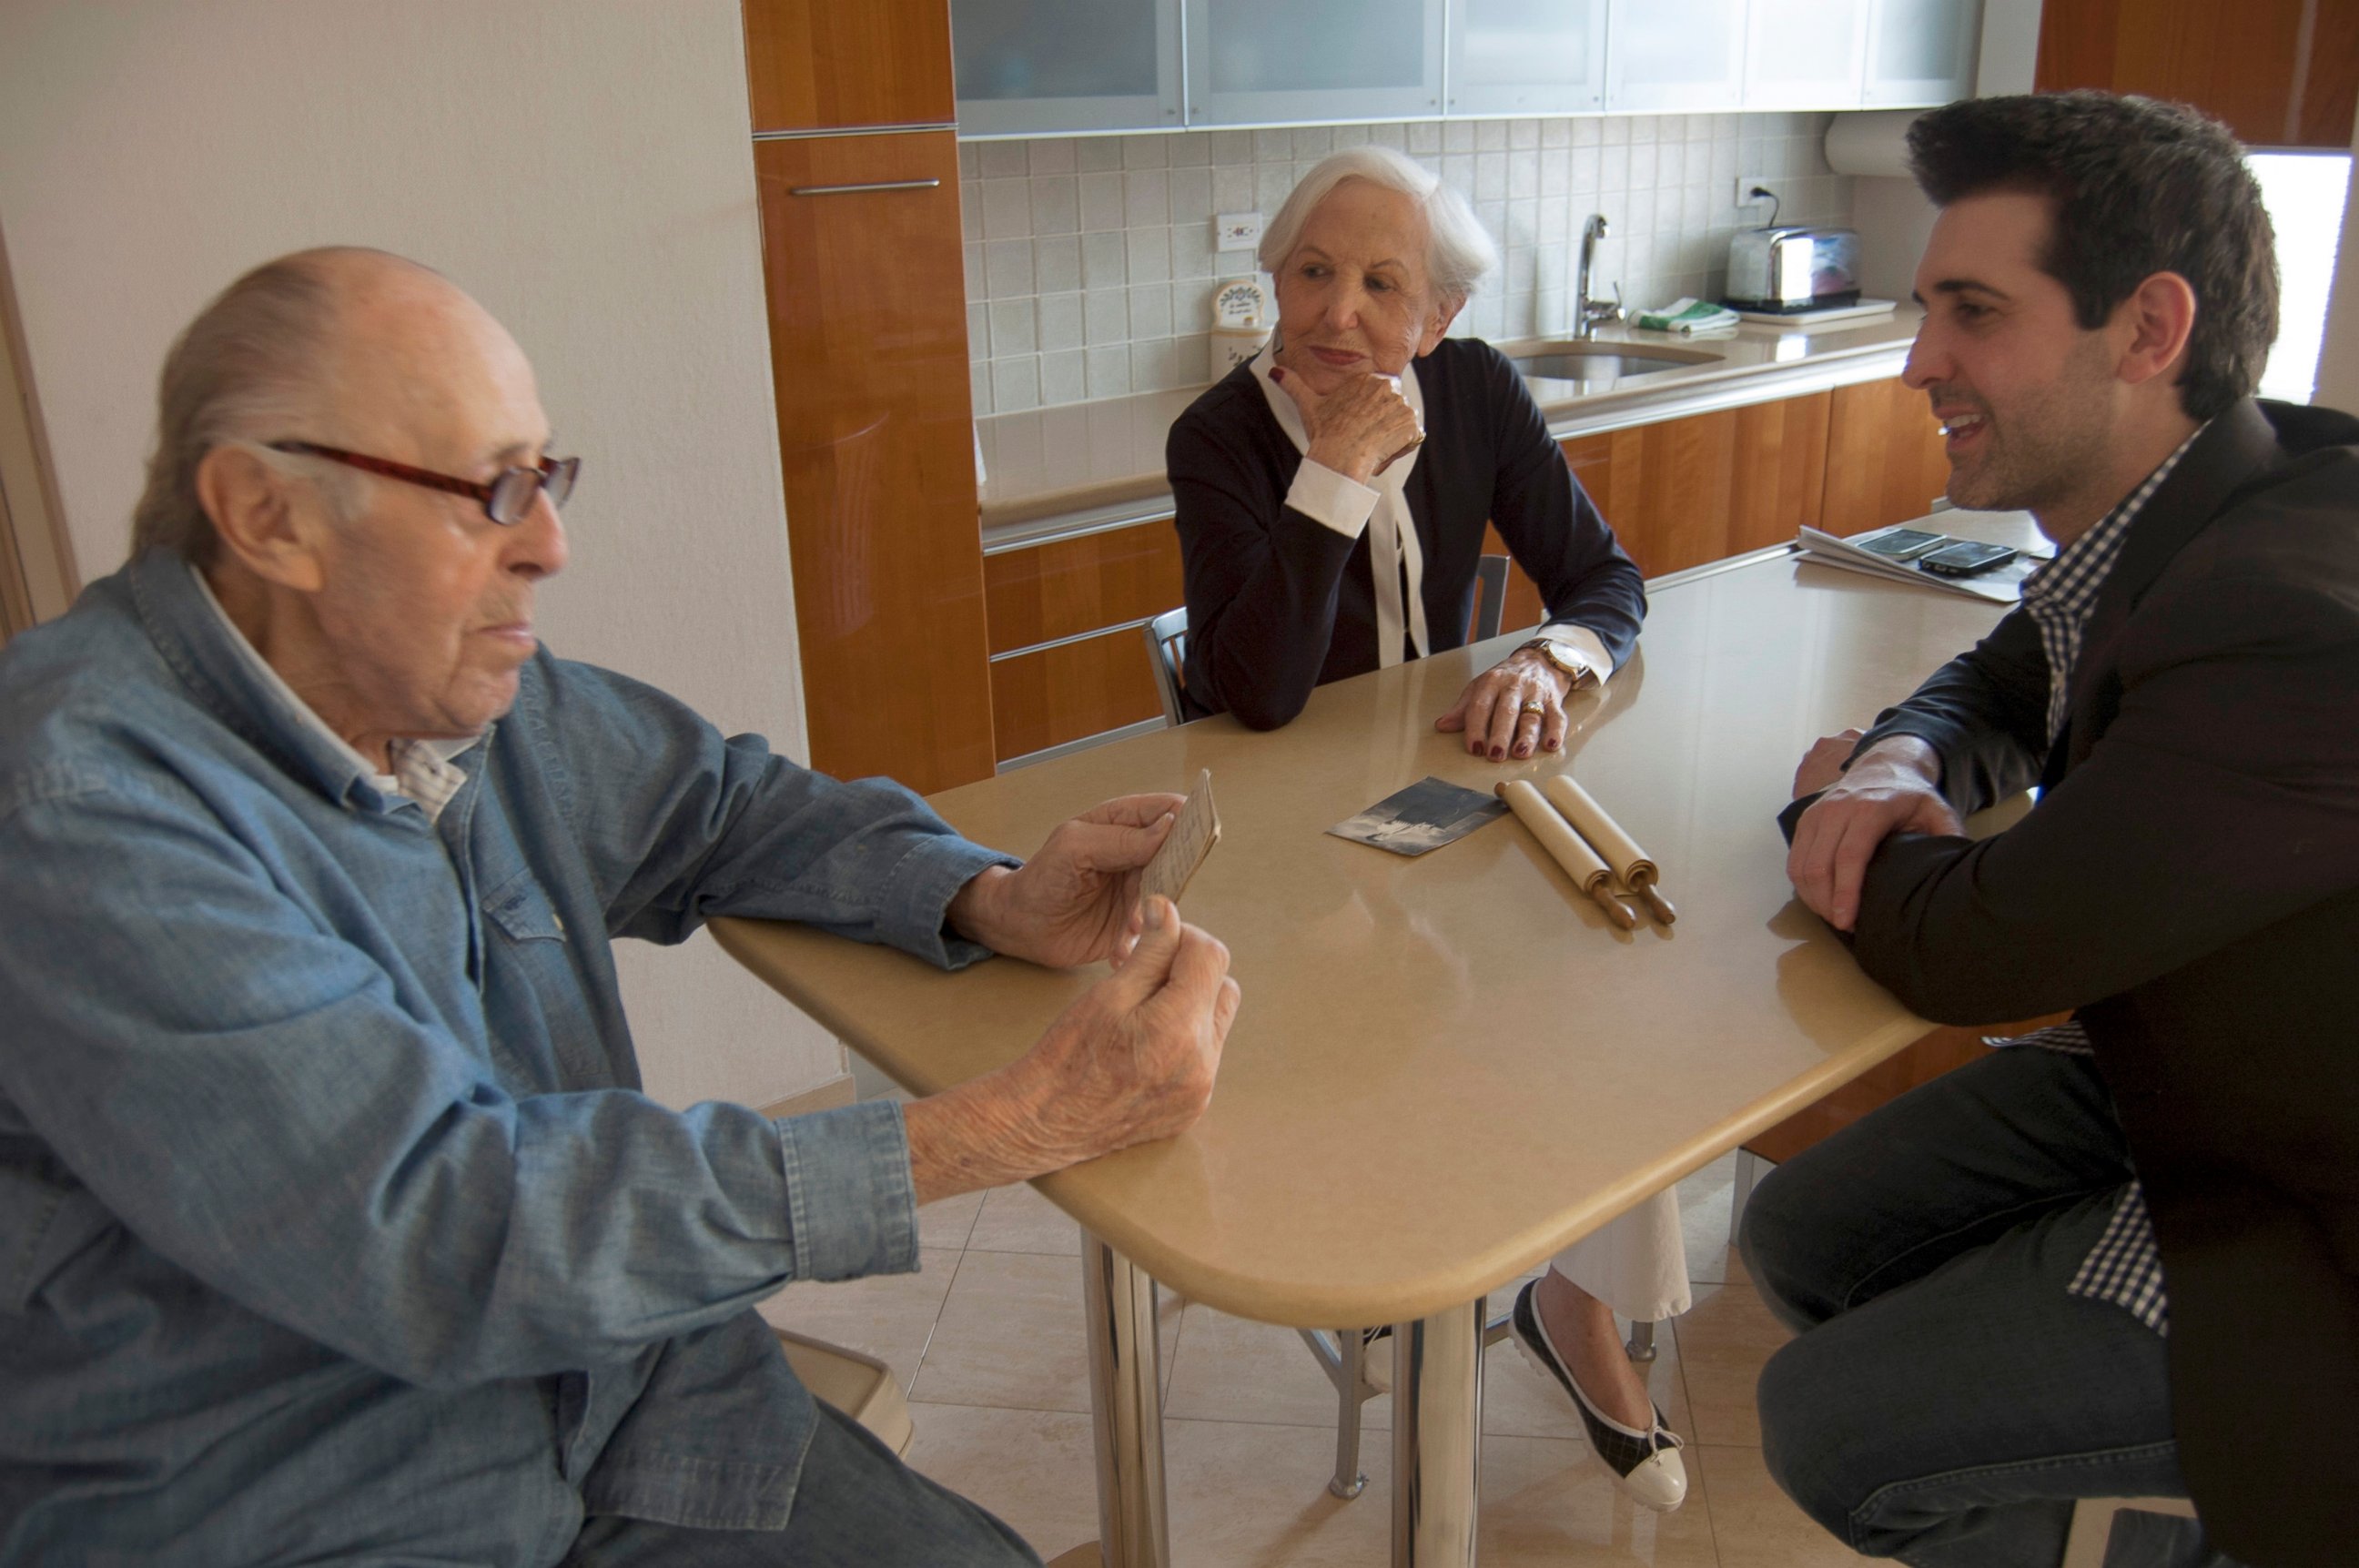 PHOTO: Michael Rothman sits down with grandfather Paul Rothman, left, for a discussion on heritage.